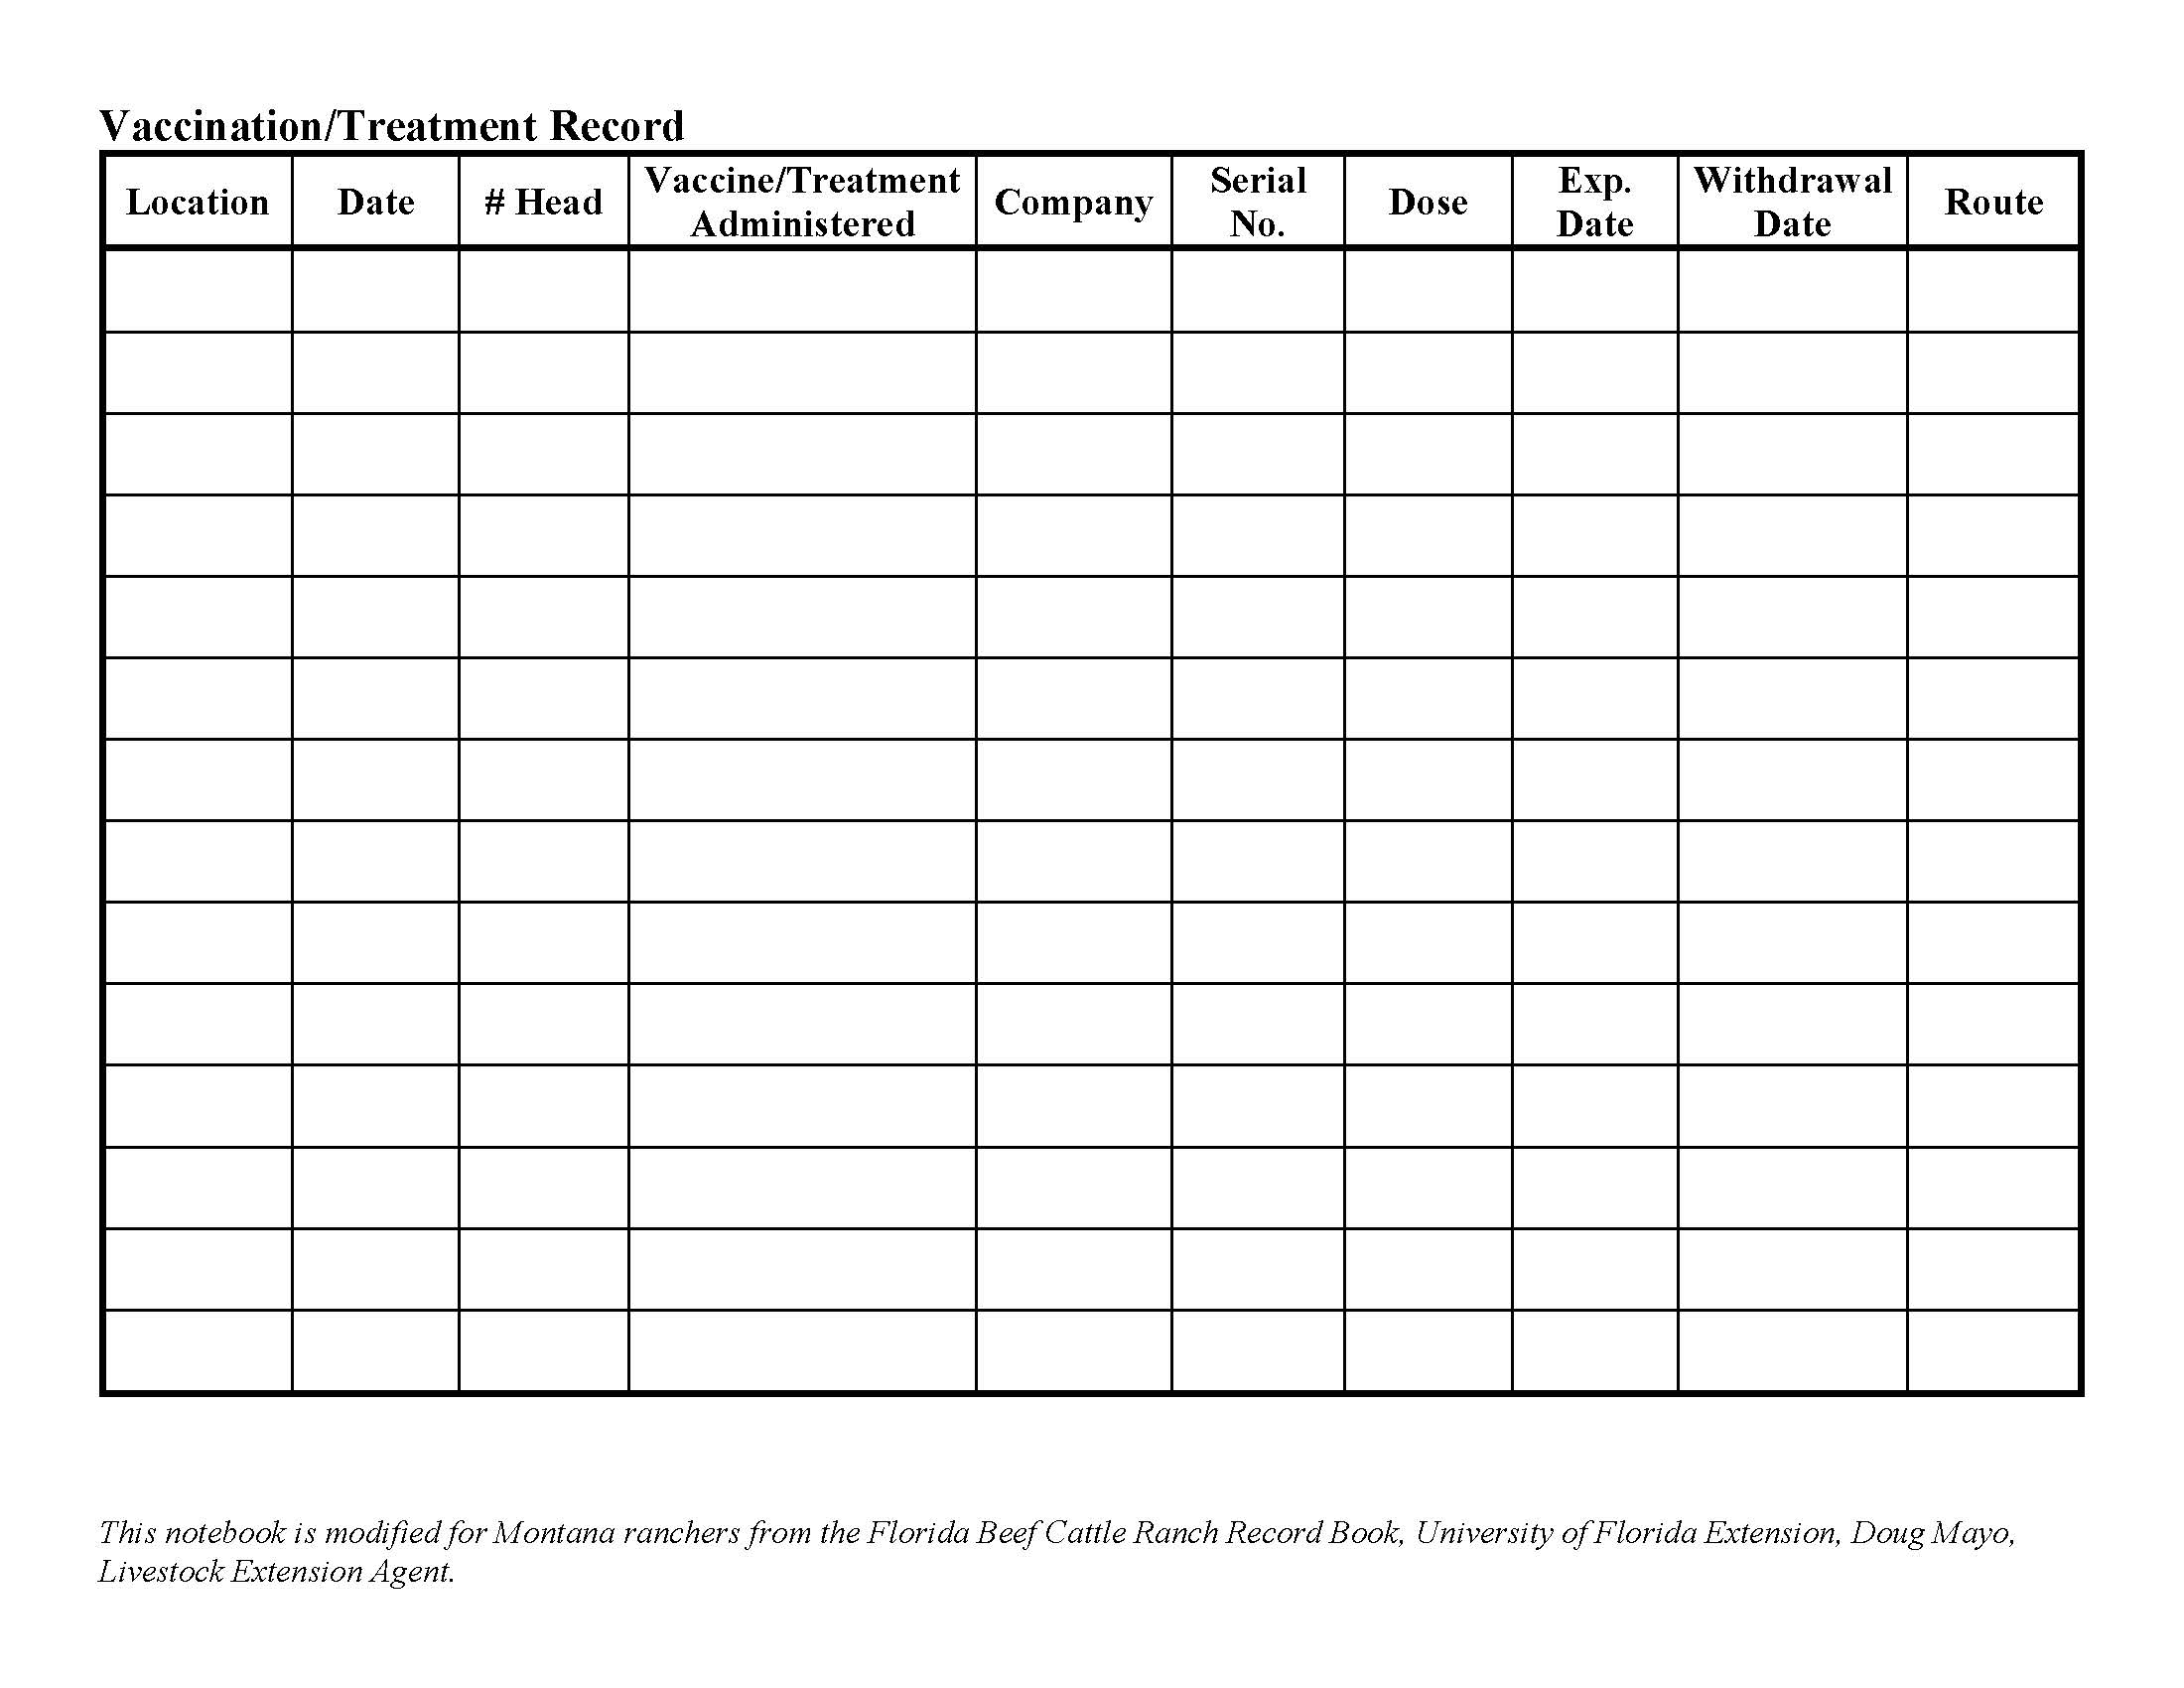 A sample table for keeping records on vaccinations. Used in the rancher notebook.